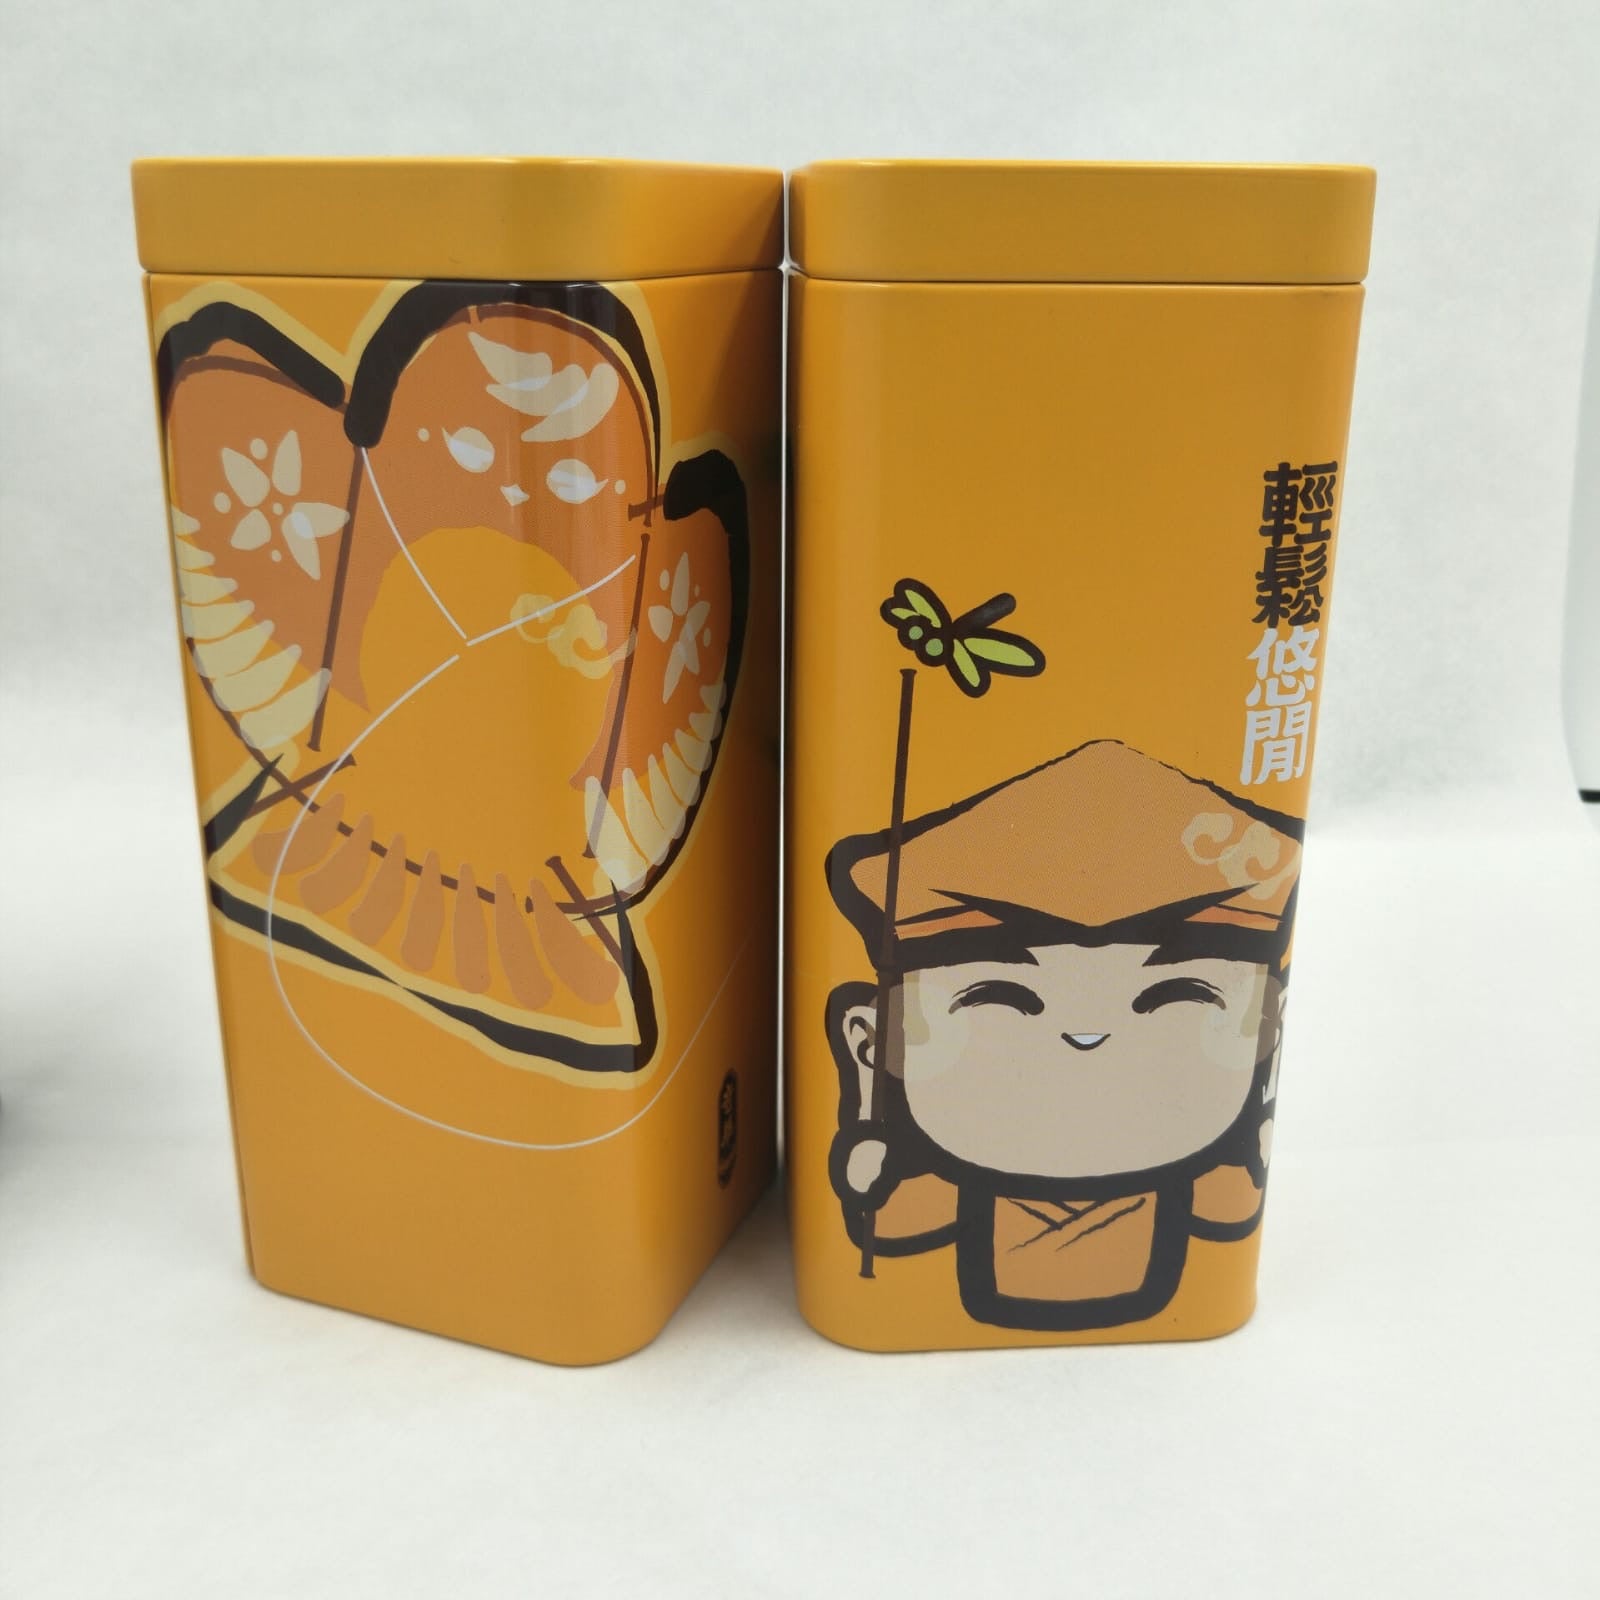 Almond Biscuits Gift Box 奇禮杏仁餅 - Kee Wah Bakery